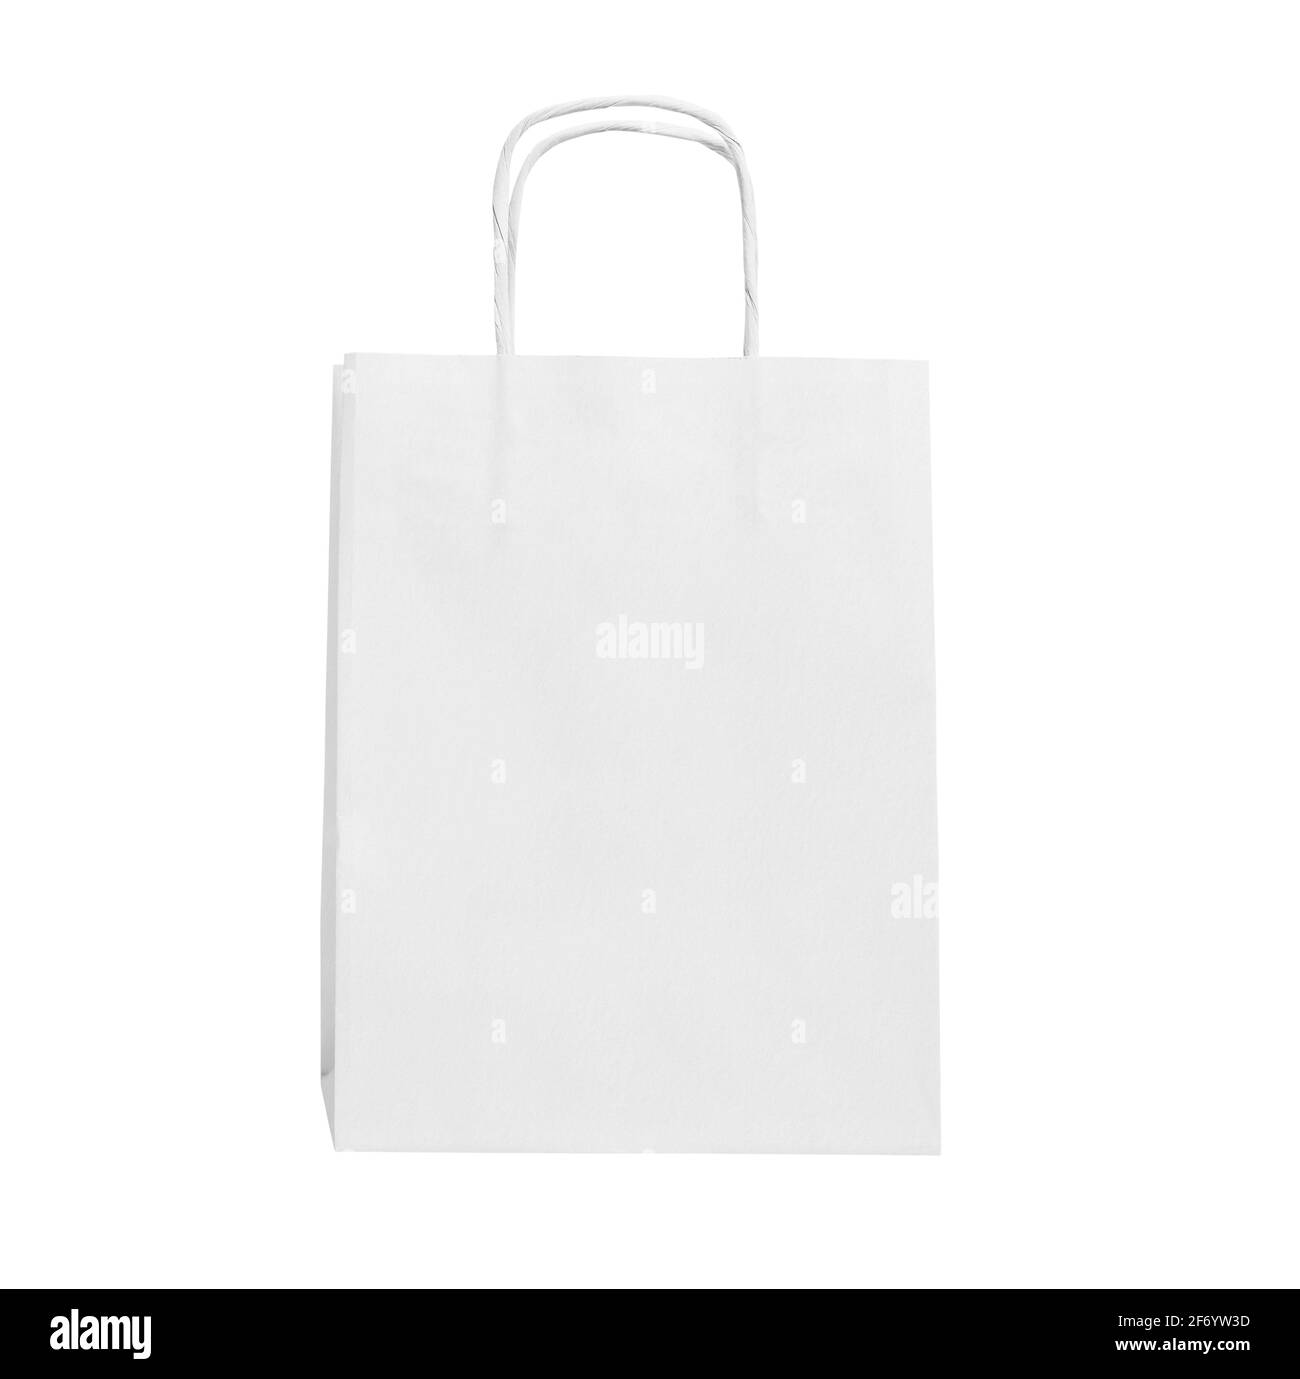 Close up of a white paper shopping bag isolated on white background, front view cutout picture Stock Photo